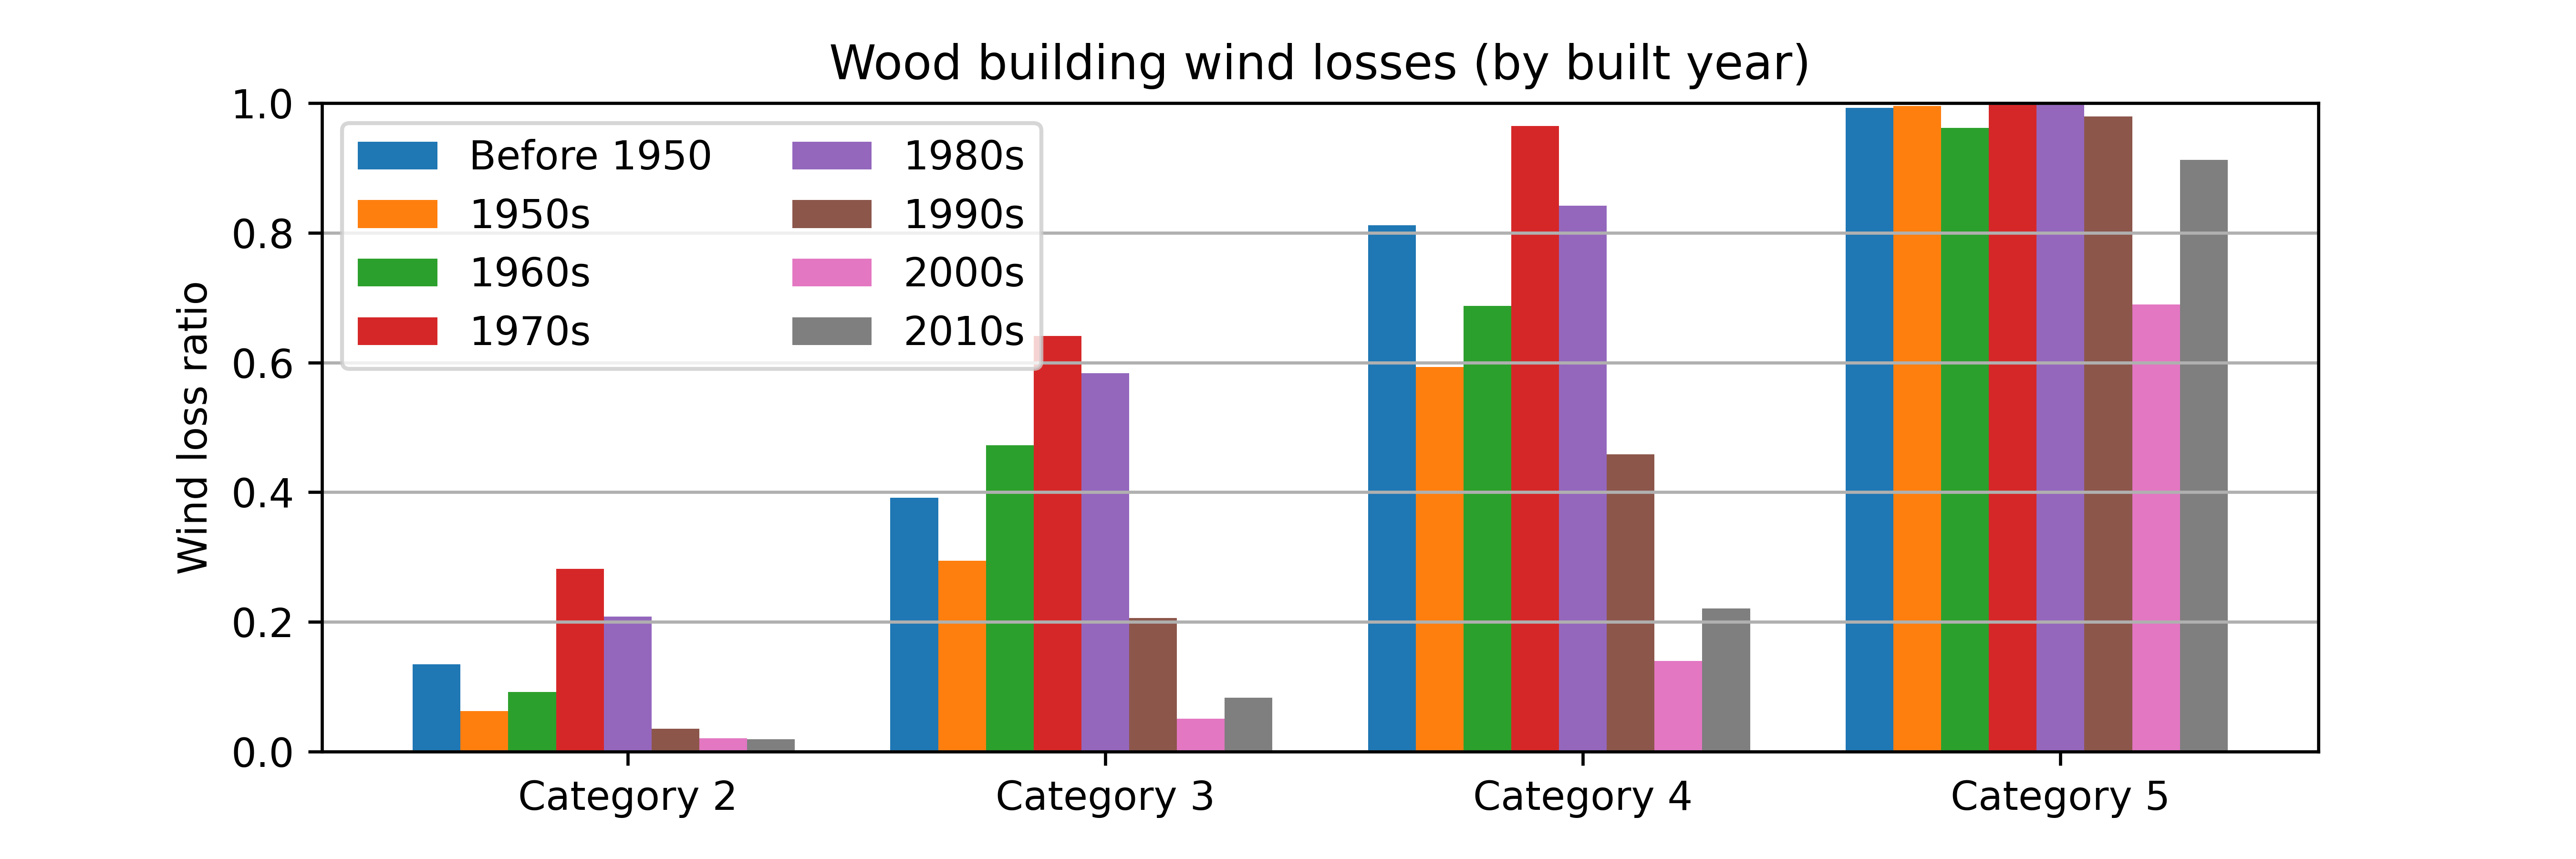 ../../../_images/WoodBuildingWindLoss.png